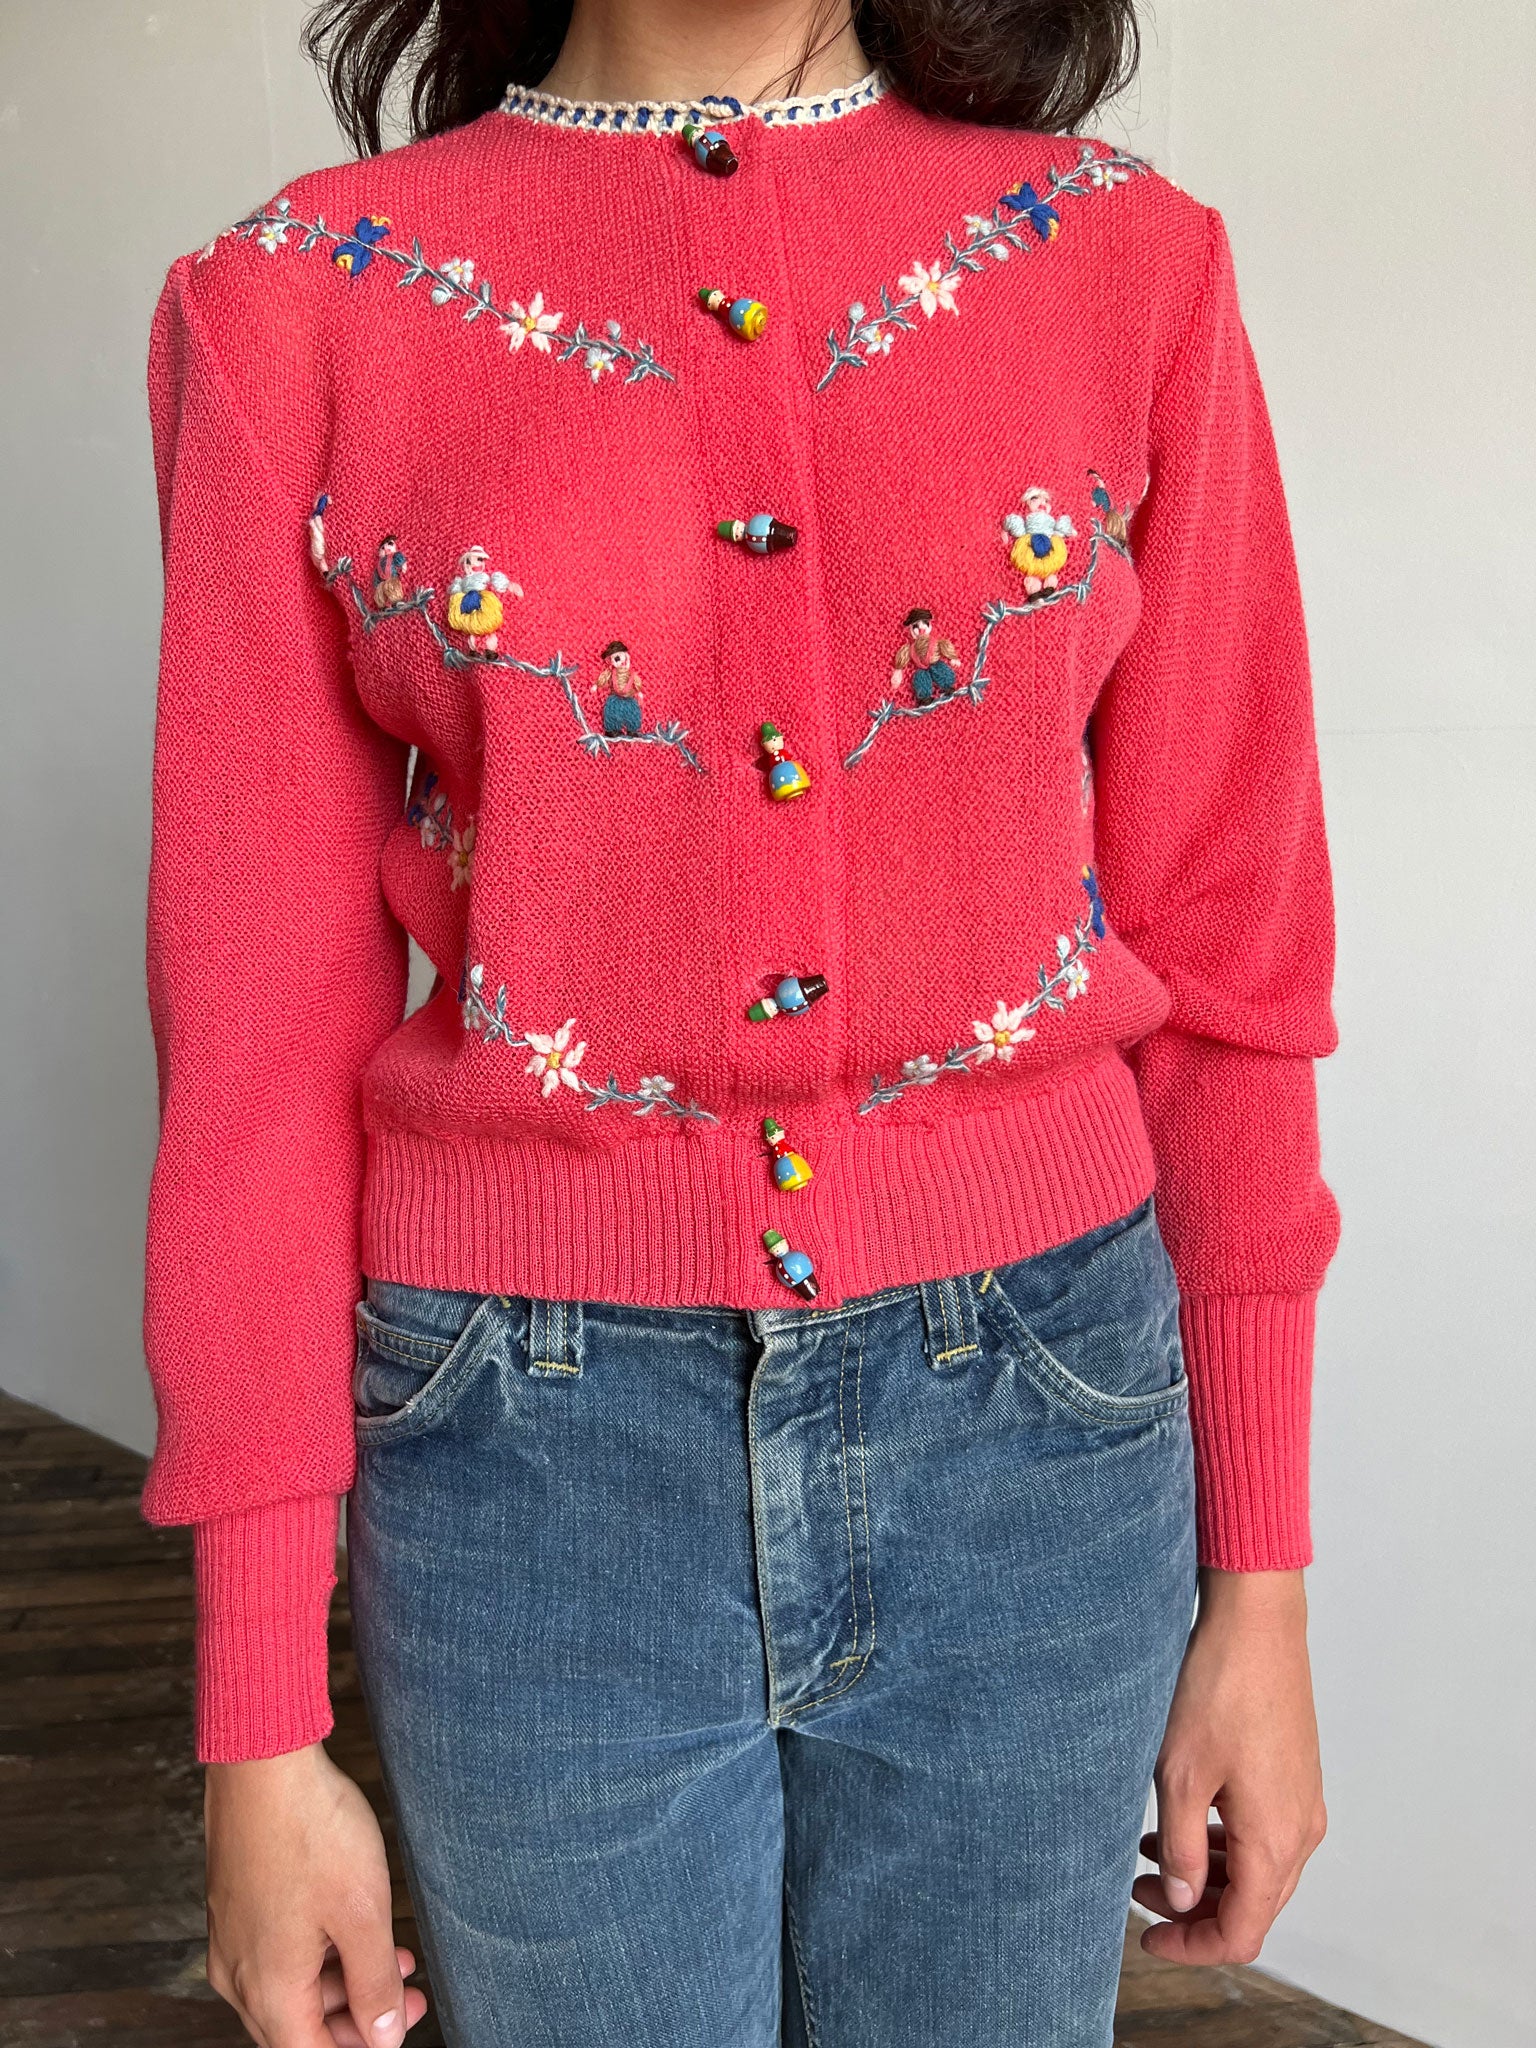 Vintage 1940's Hand Embroidered Austrian Wool Sweater with Carved People Buttons